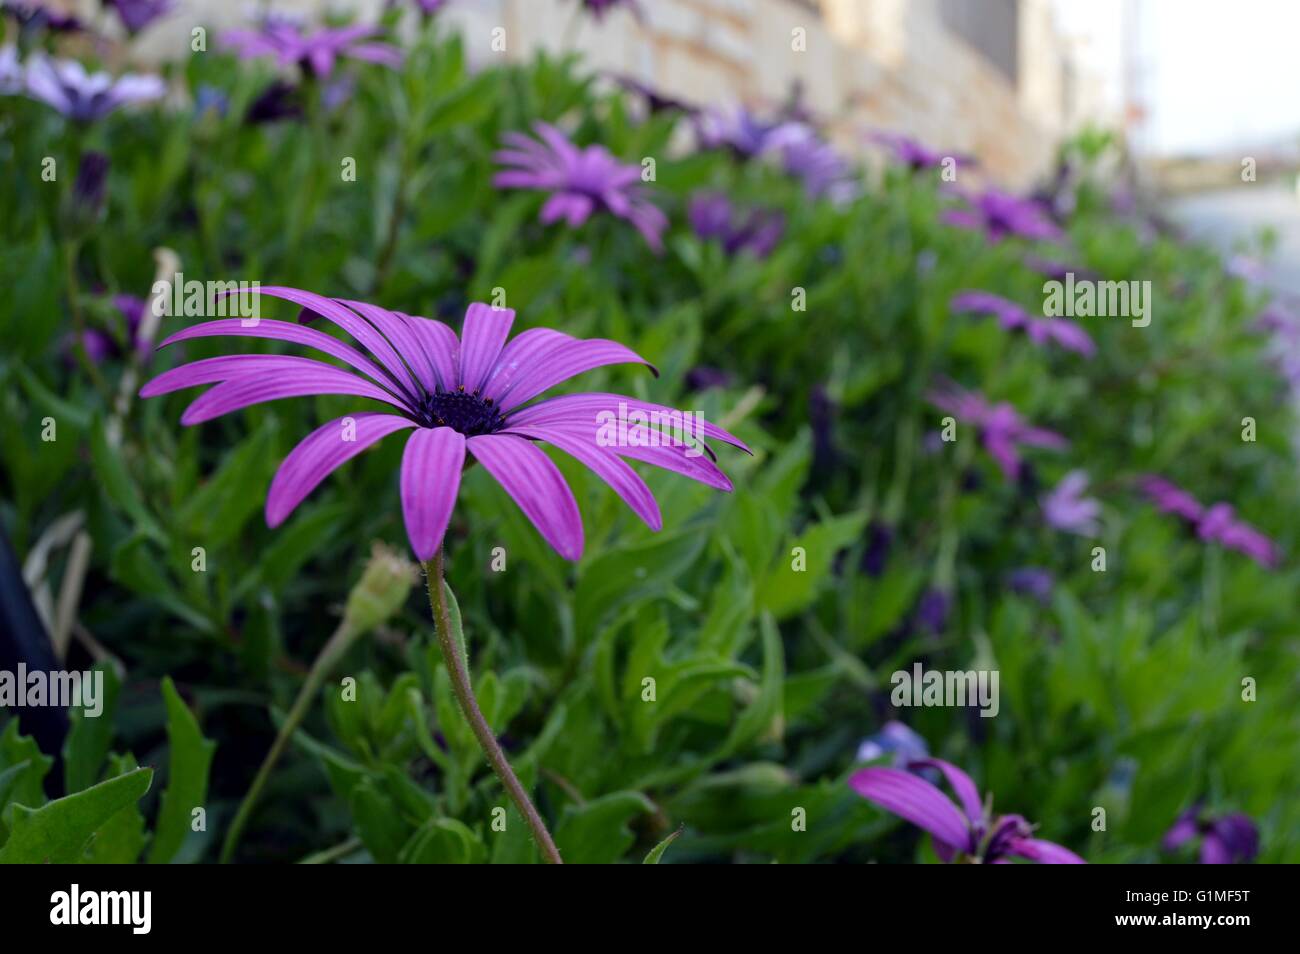 Flower carpet of mauve color with several petals on a green vegetation. Stock Photo